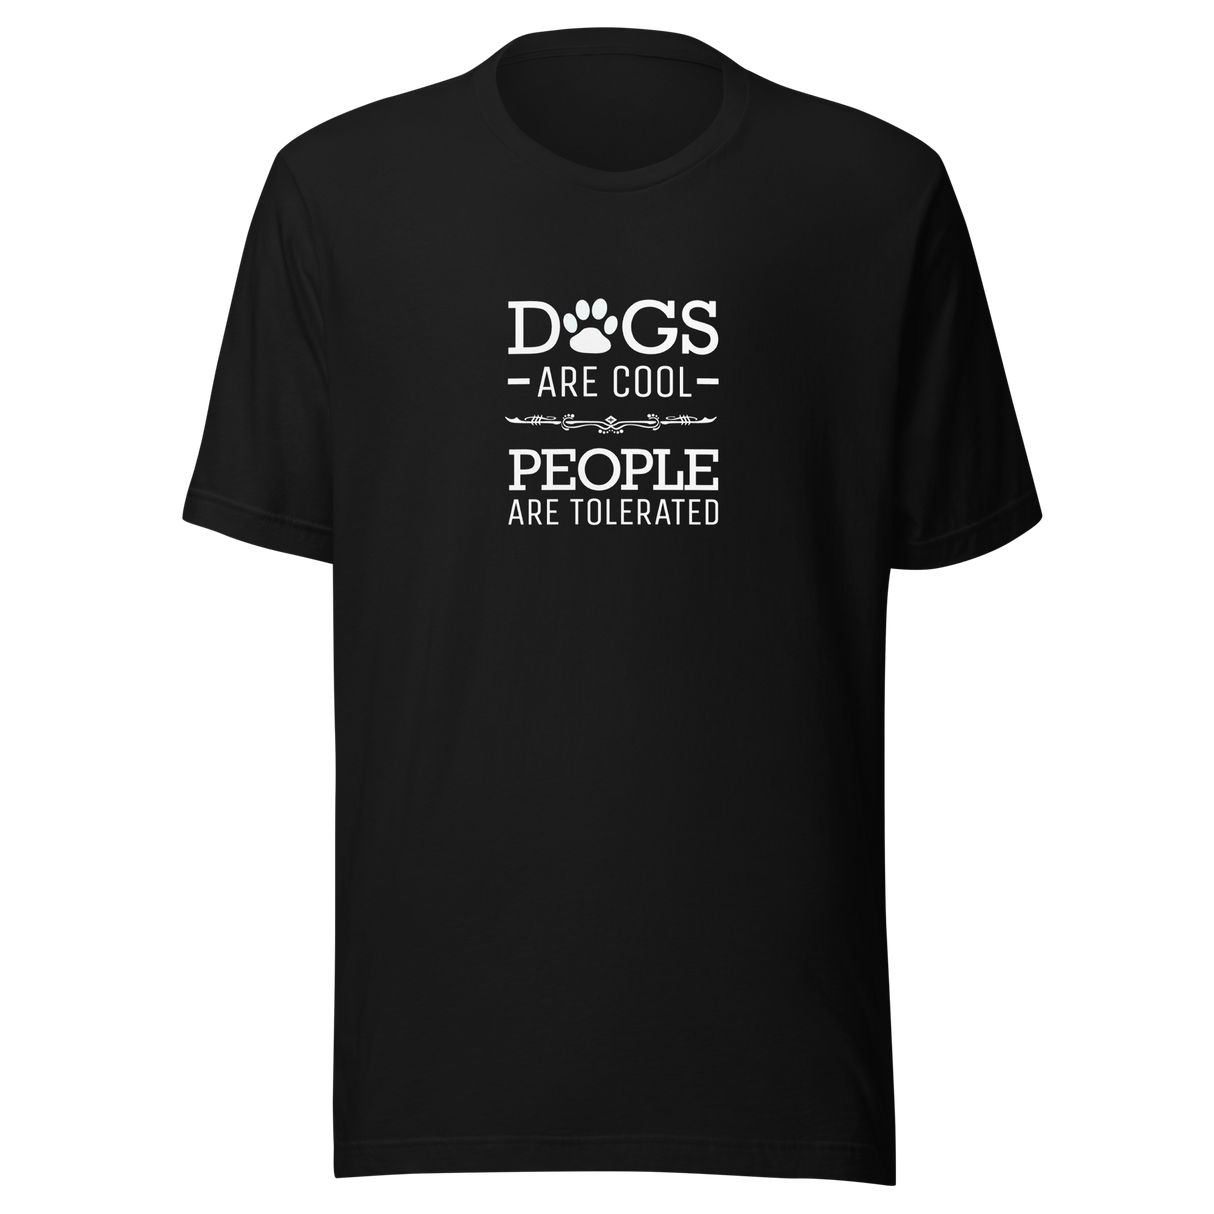 dogs-are-cool-people-are-tolerated-dog-are-cool-tee-animal-lover-t-shirt-dog-humor-tee-dog-lover-t-shirt-ladies-tee#color_black